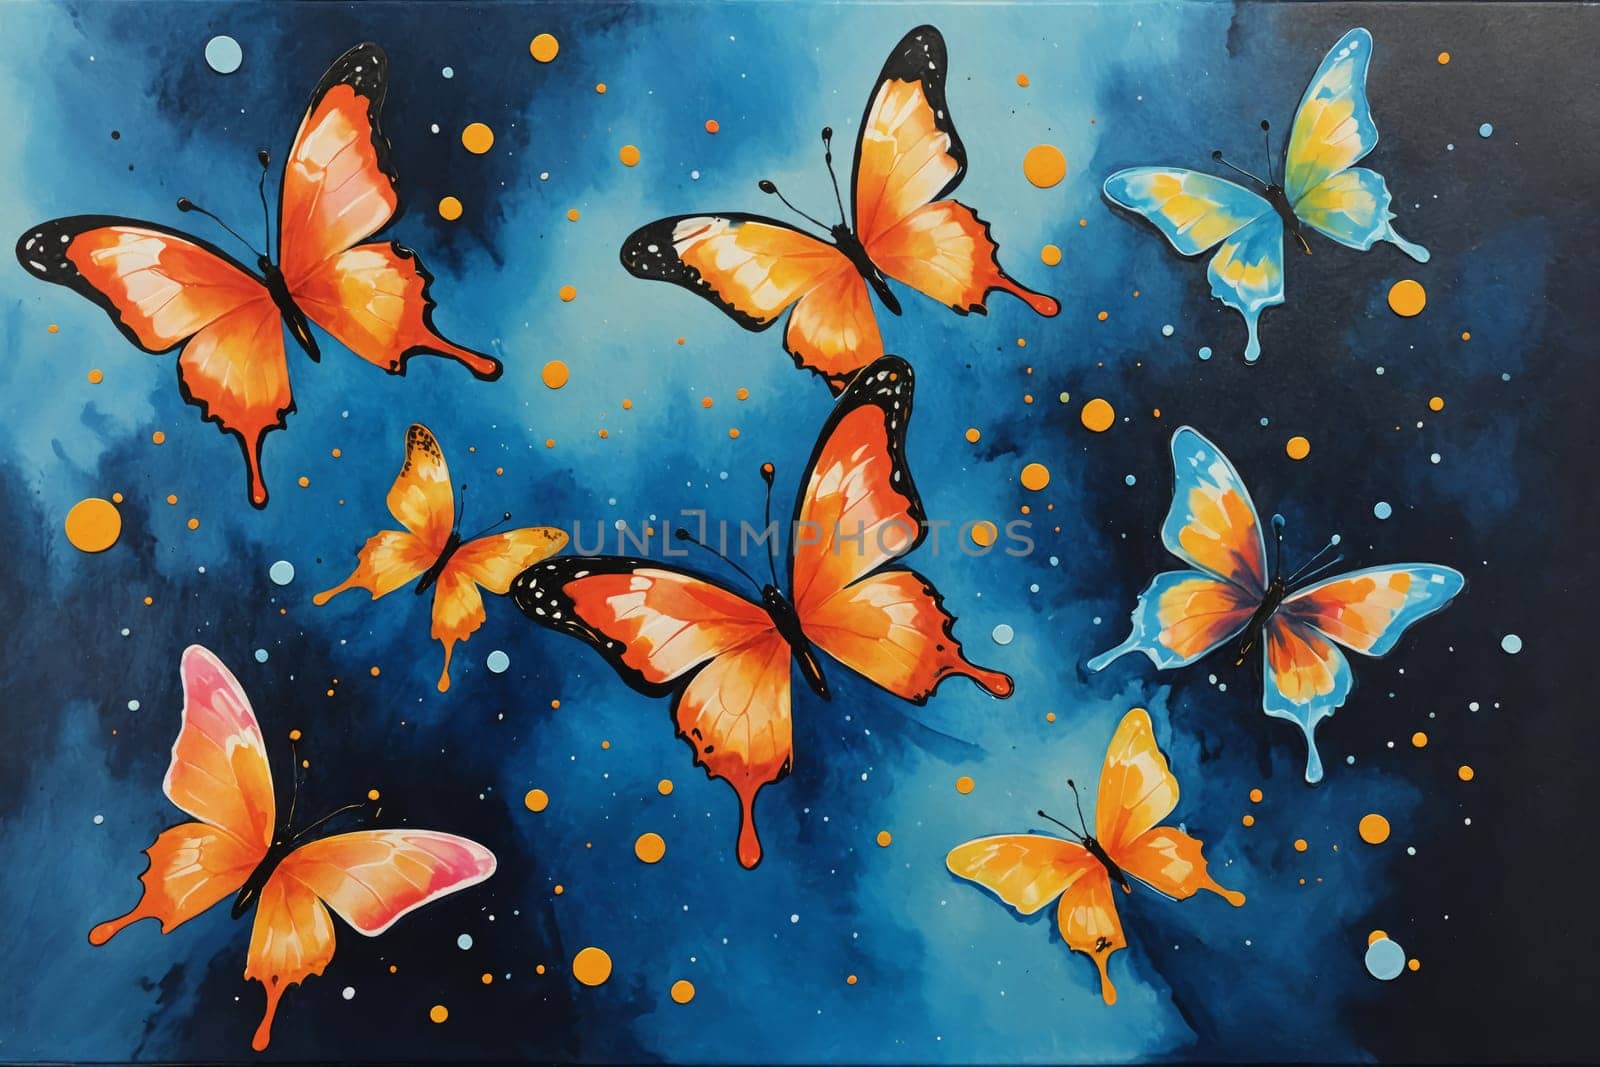 Vibrant Dance of Monarch Butterflies Over a Watercolor Dreamscape. by Andre1ns